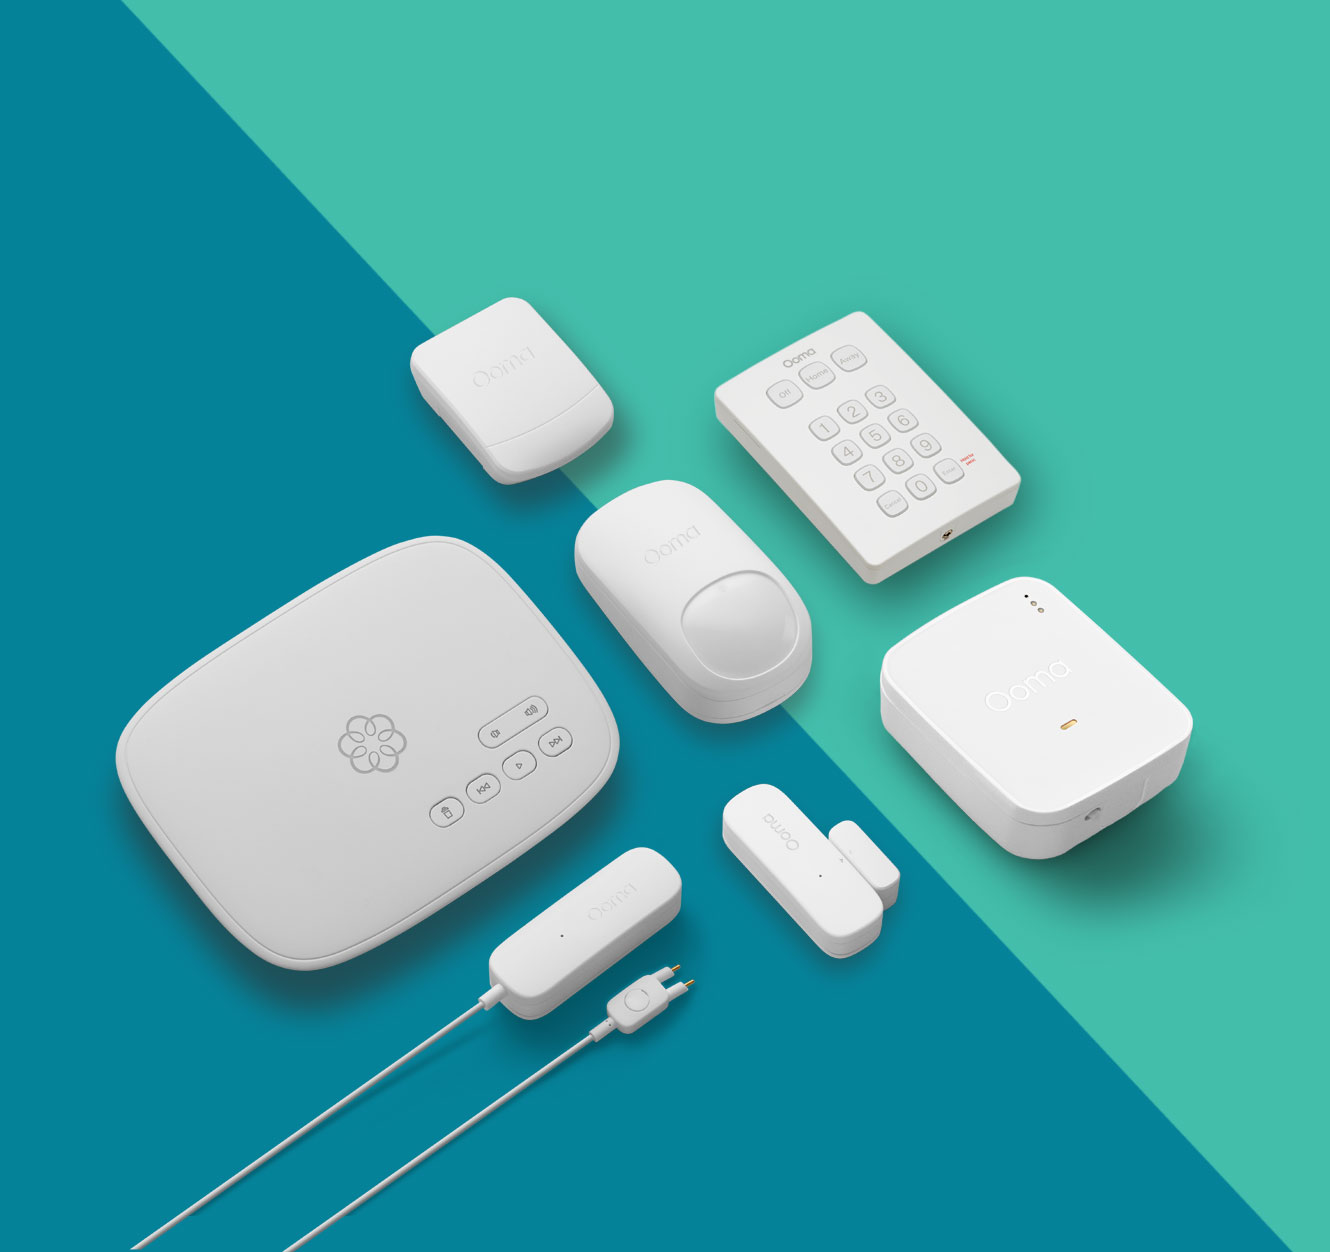 Ooma Home Security Family of Devices - Ooma Telo Base Station, Door and Window, Water Sensor, Smoke Alarm 